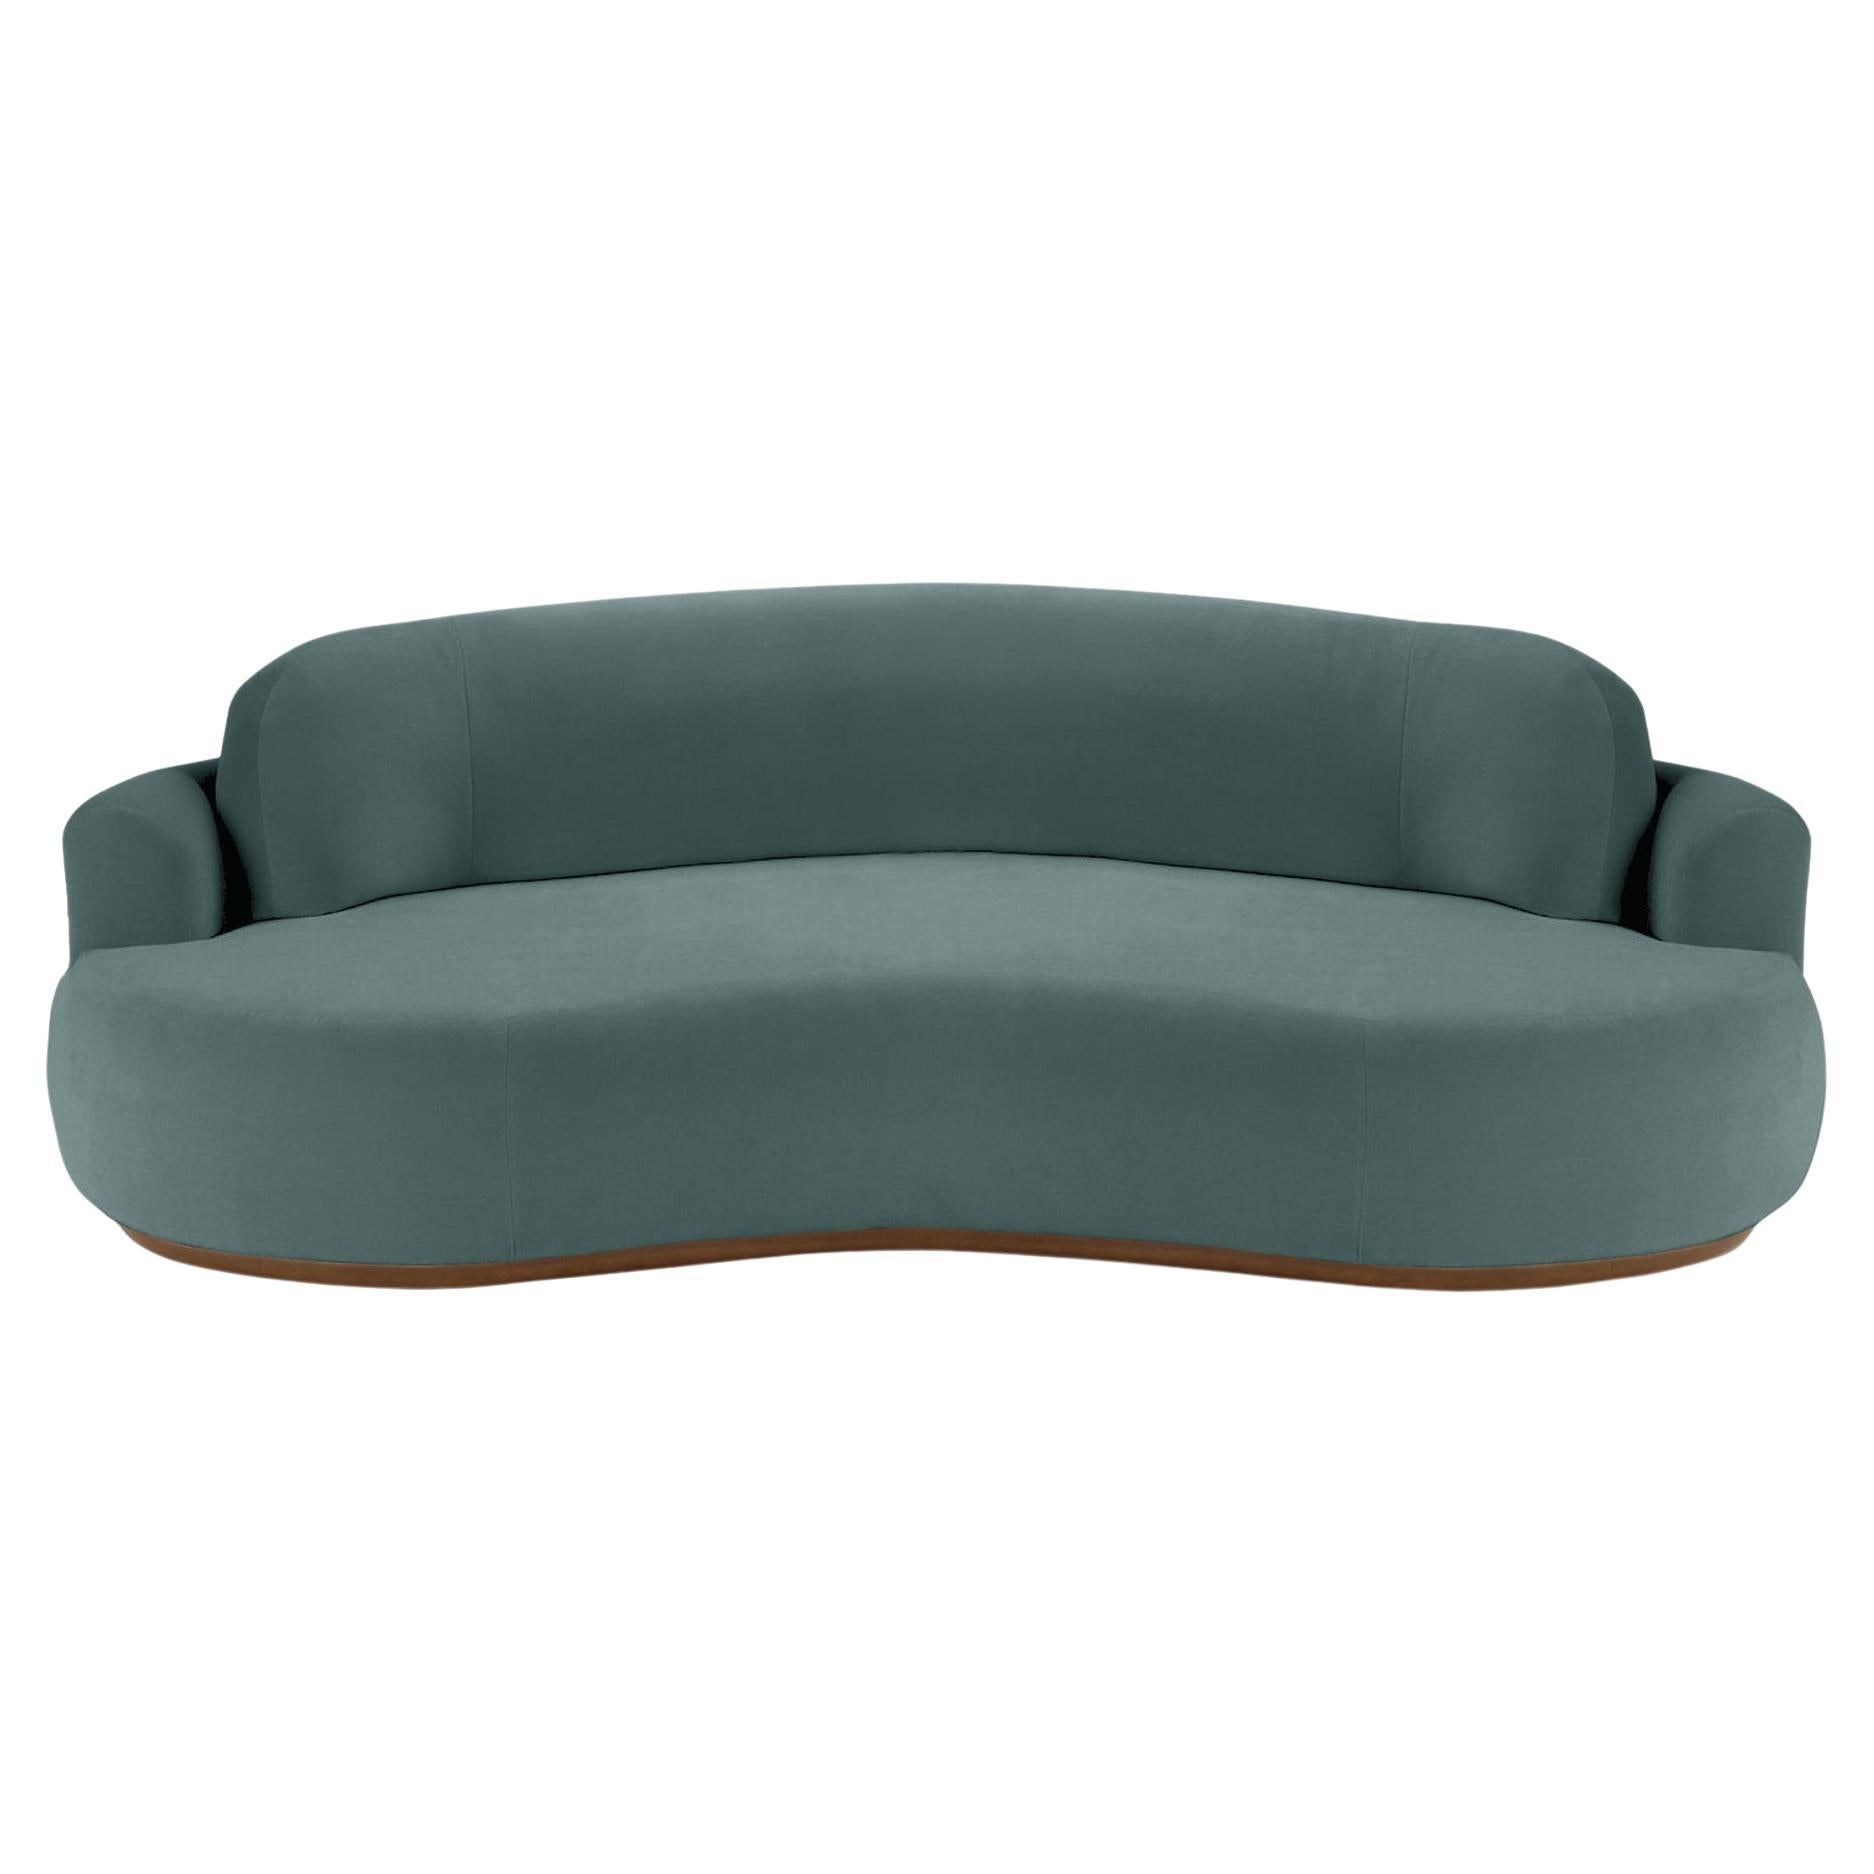 Naked Round Sofa, Medium with Beech Ash-056-1 and Teal